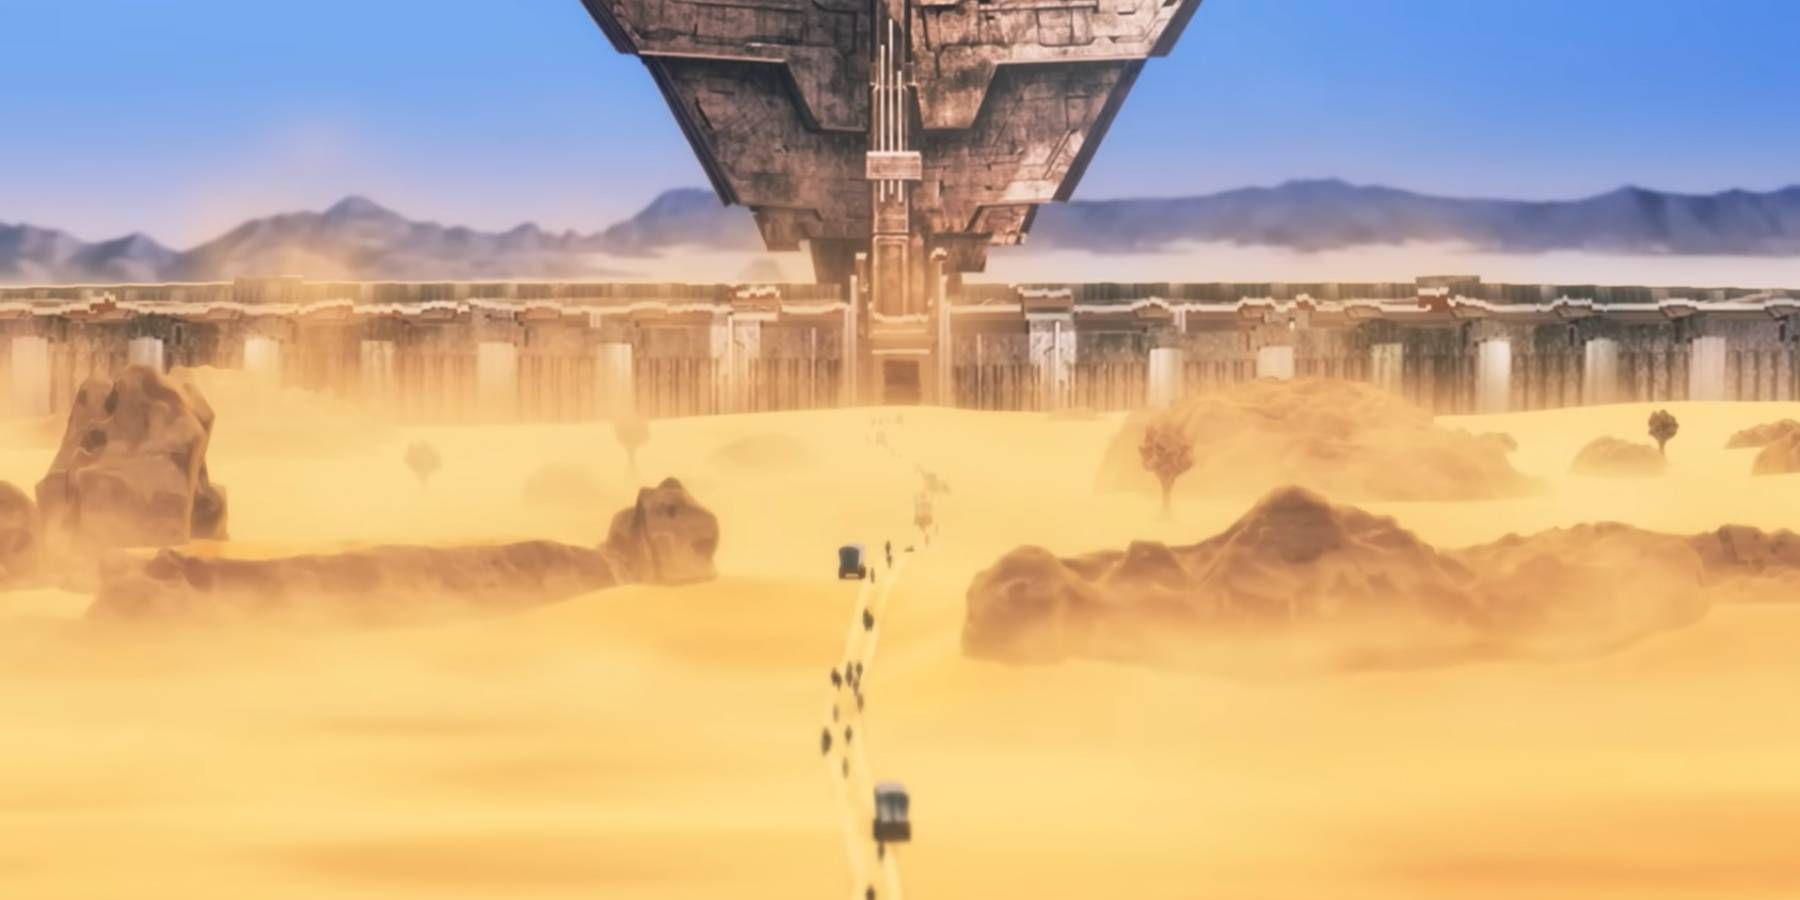 Crowds of people traveling to a city in the desert in Metaphor: ReFantazio